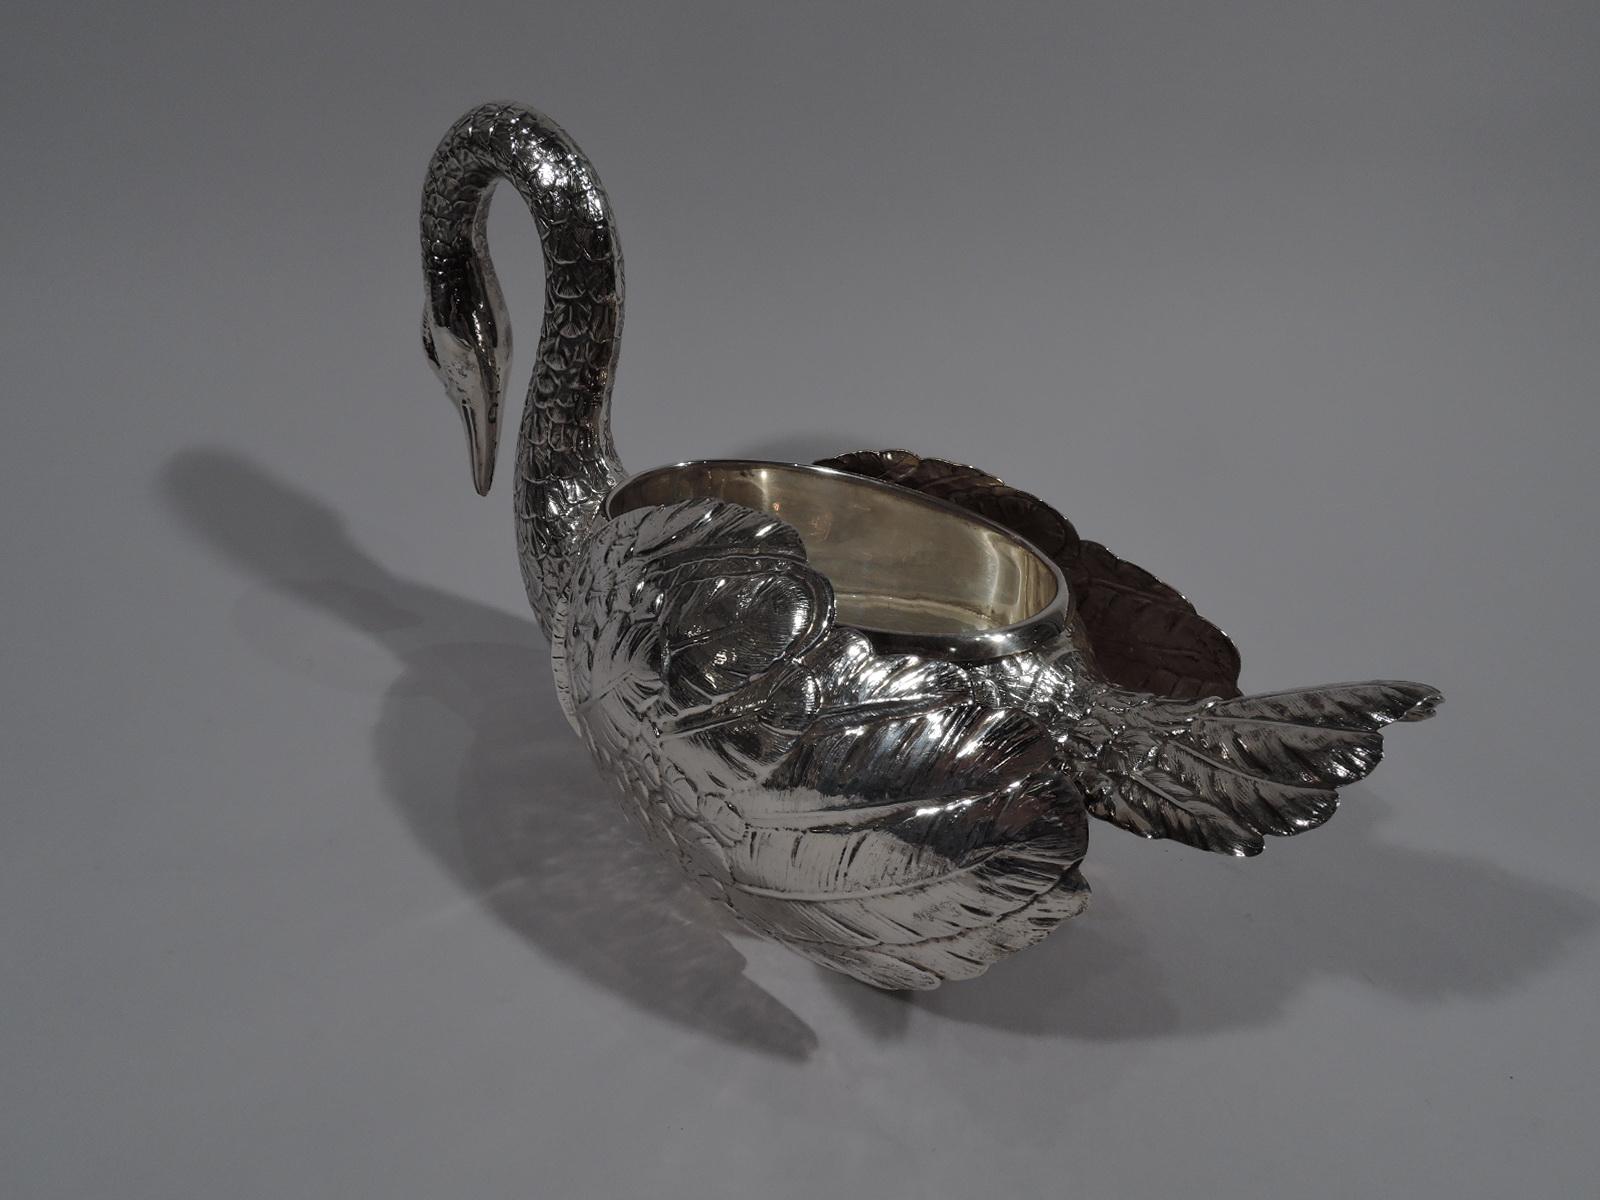 Stately sterling silver swan. Oval body with gracefully scrolled neck terminating in closed bill. Erect tail feathers and hinged wings. Beautiful plumage as befits an elegant table companion. Body hollow with detachable liner for holding special